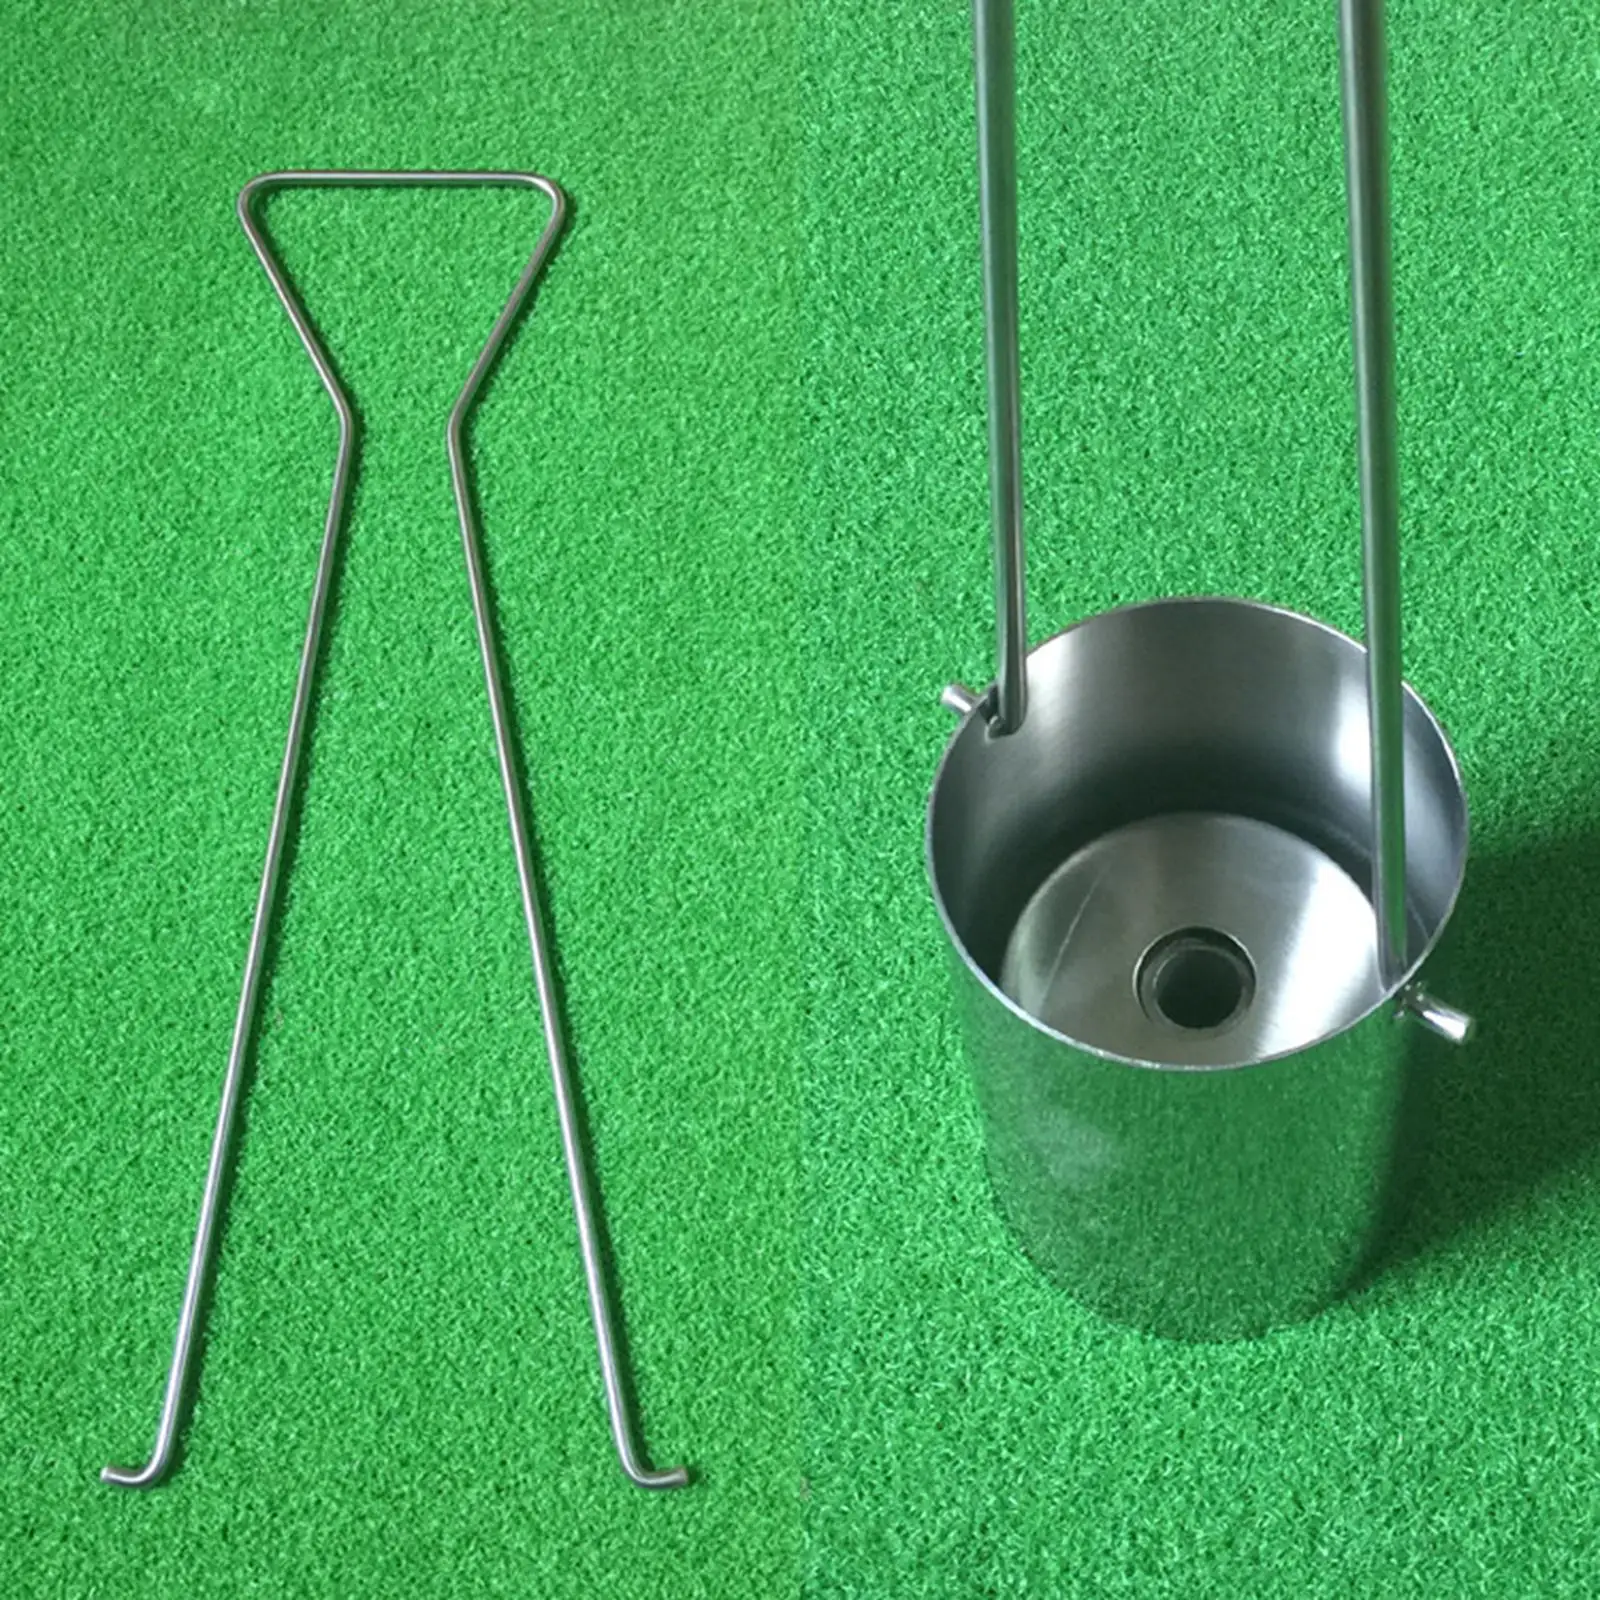 Golf Hole Cup Picking Tool Putting Green Cup Grabber Golf Tool, Golf Accessories, Green Cup Taker